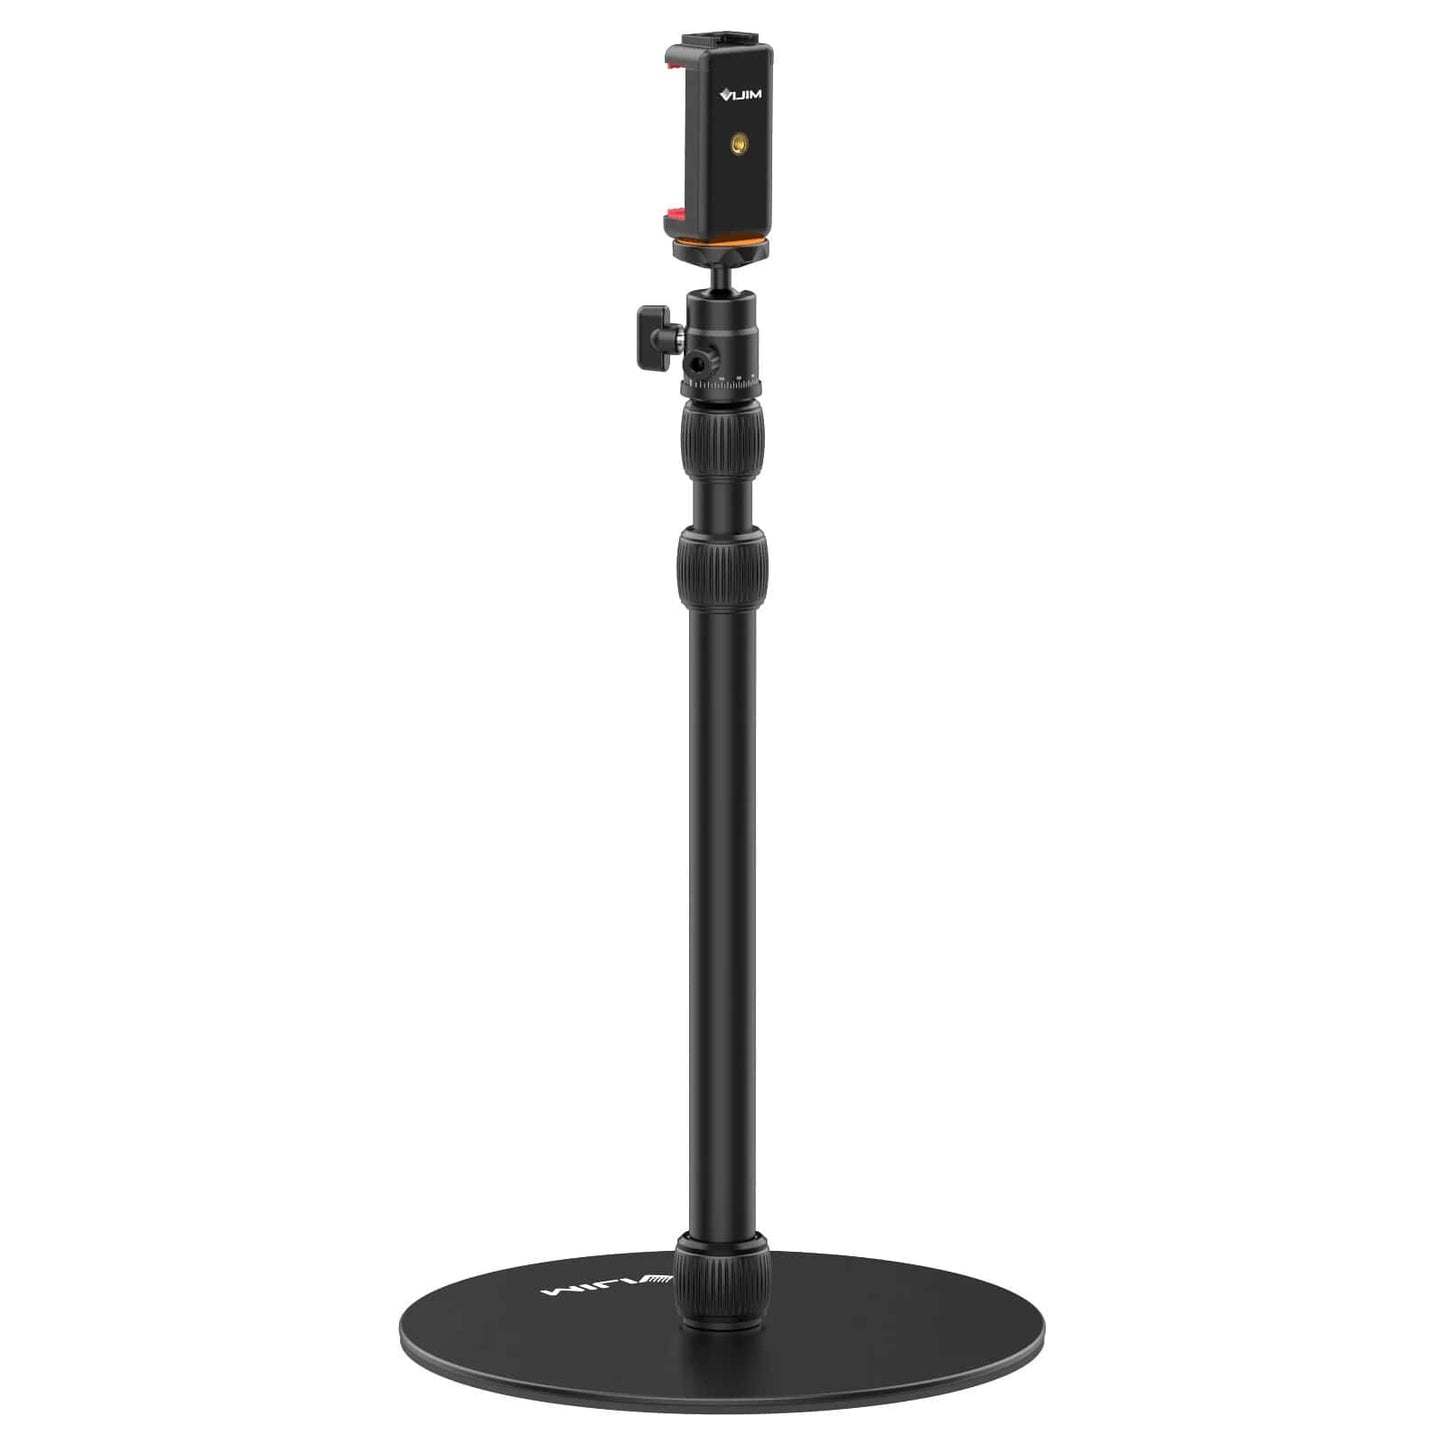 Vijim by Ulanzi LS09 Extendable Heavy Base Stand with 1/4-inch Ball Mount, Smartphone Clip, and Action Cam Adapter for Cameras and Lights | 2952